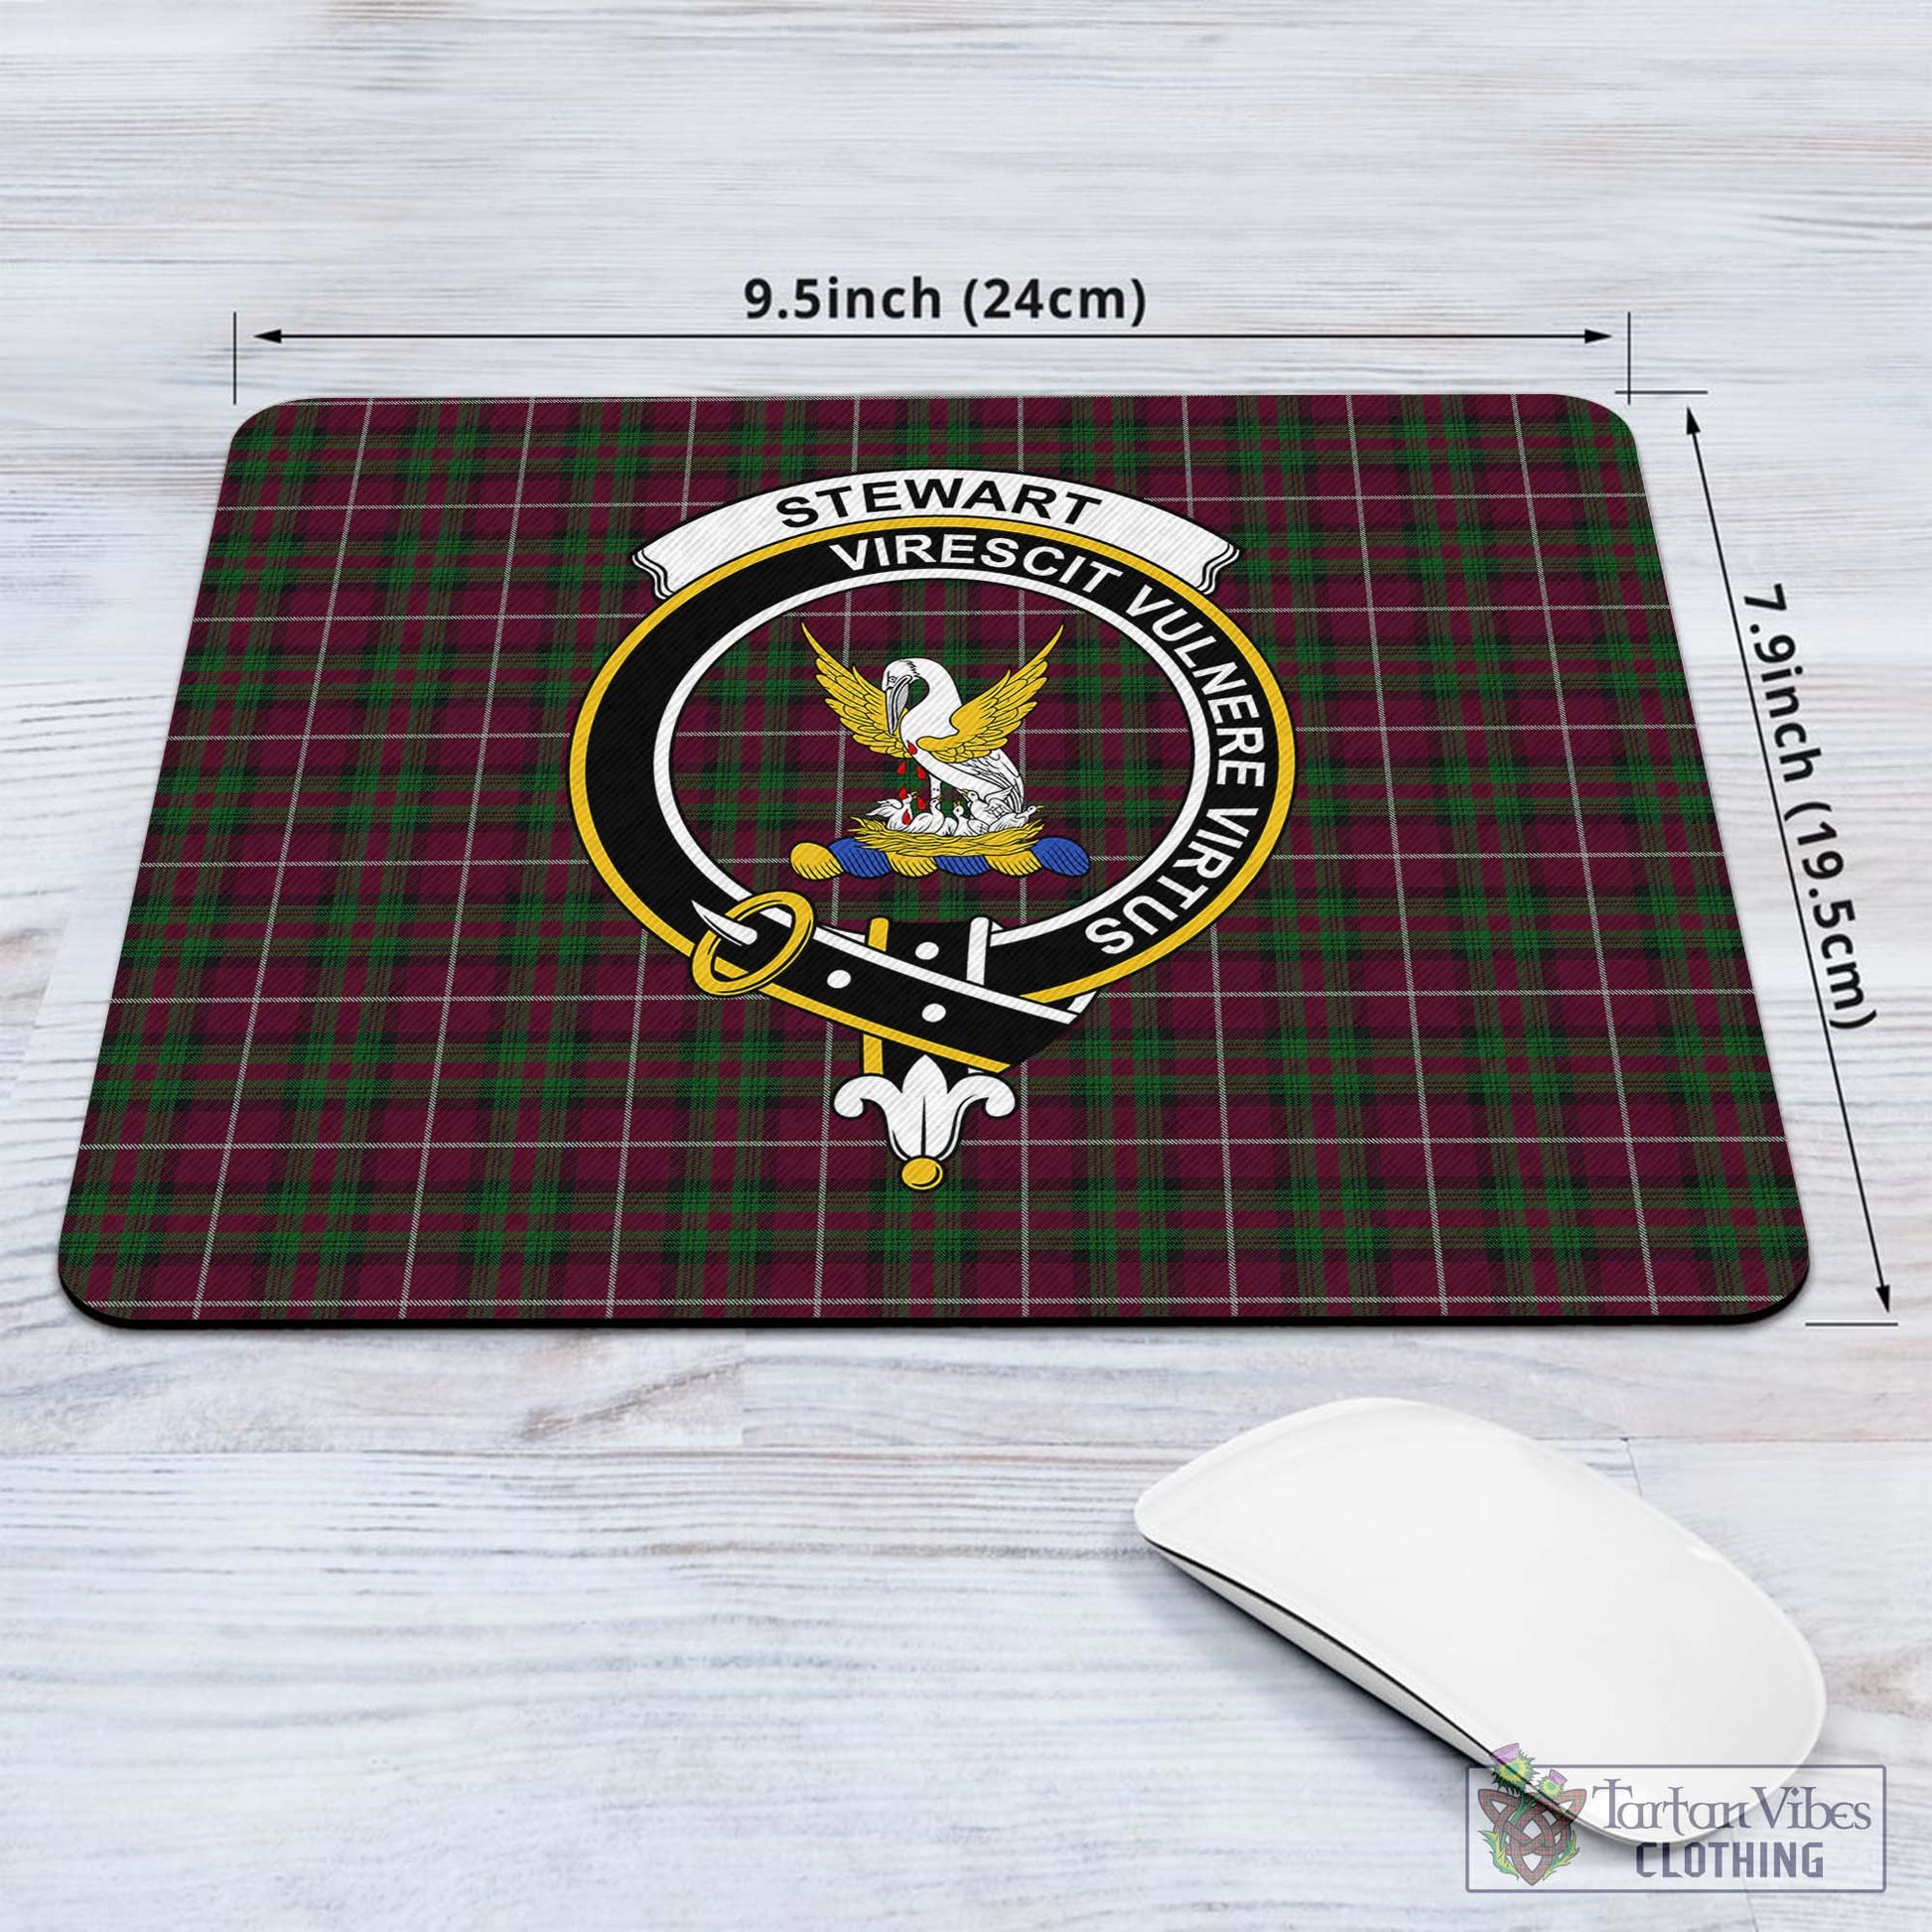 Tartan Vibes Clothing Stewart of Bute Hunting Tartan Mouse Pad with Family Crest